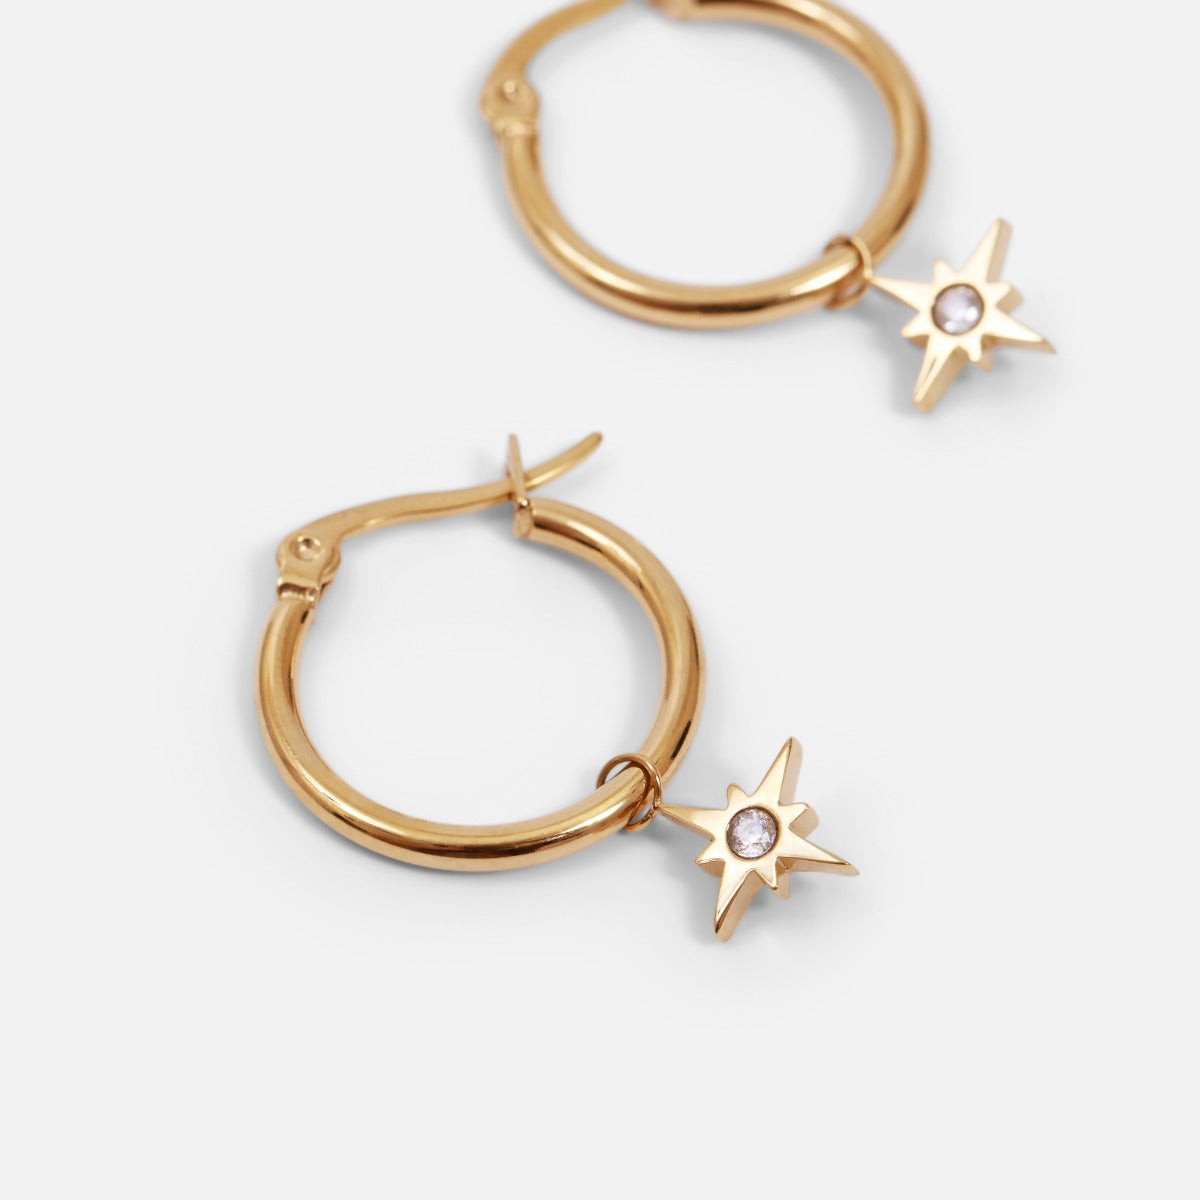 Golden earrings with star charm in stainless steel